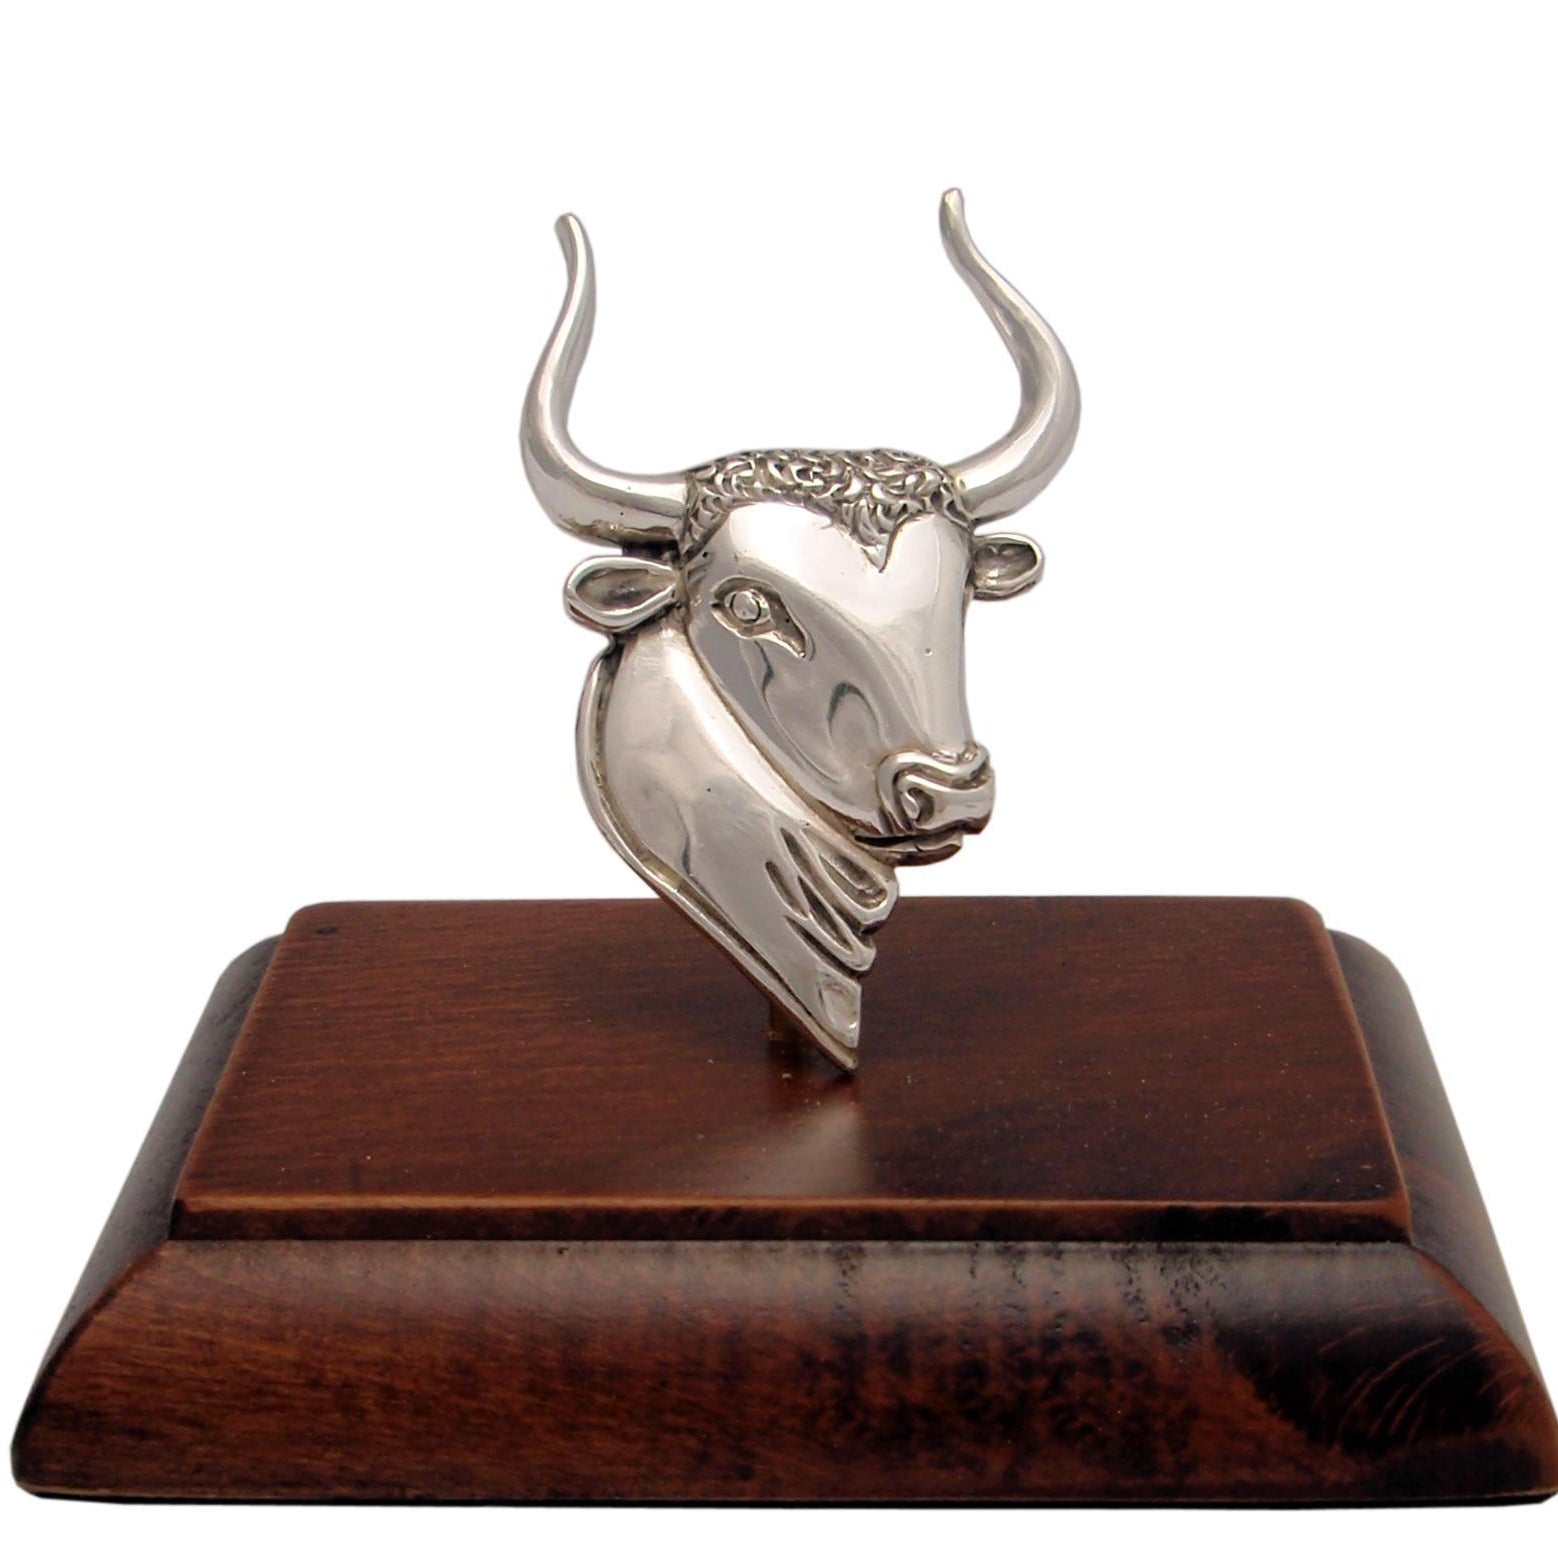 Minotaur of Knossos Figurine in sterling silver on wooden support (K-70.1)